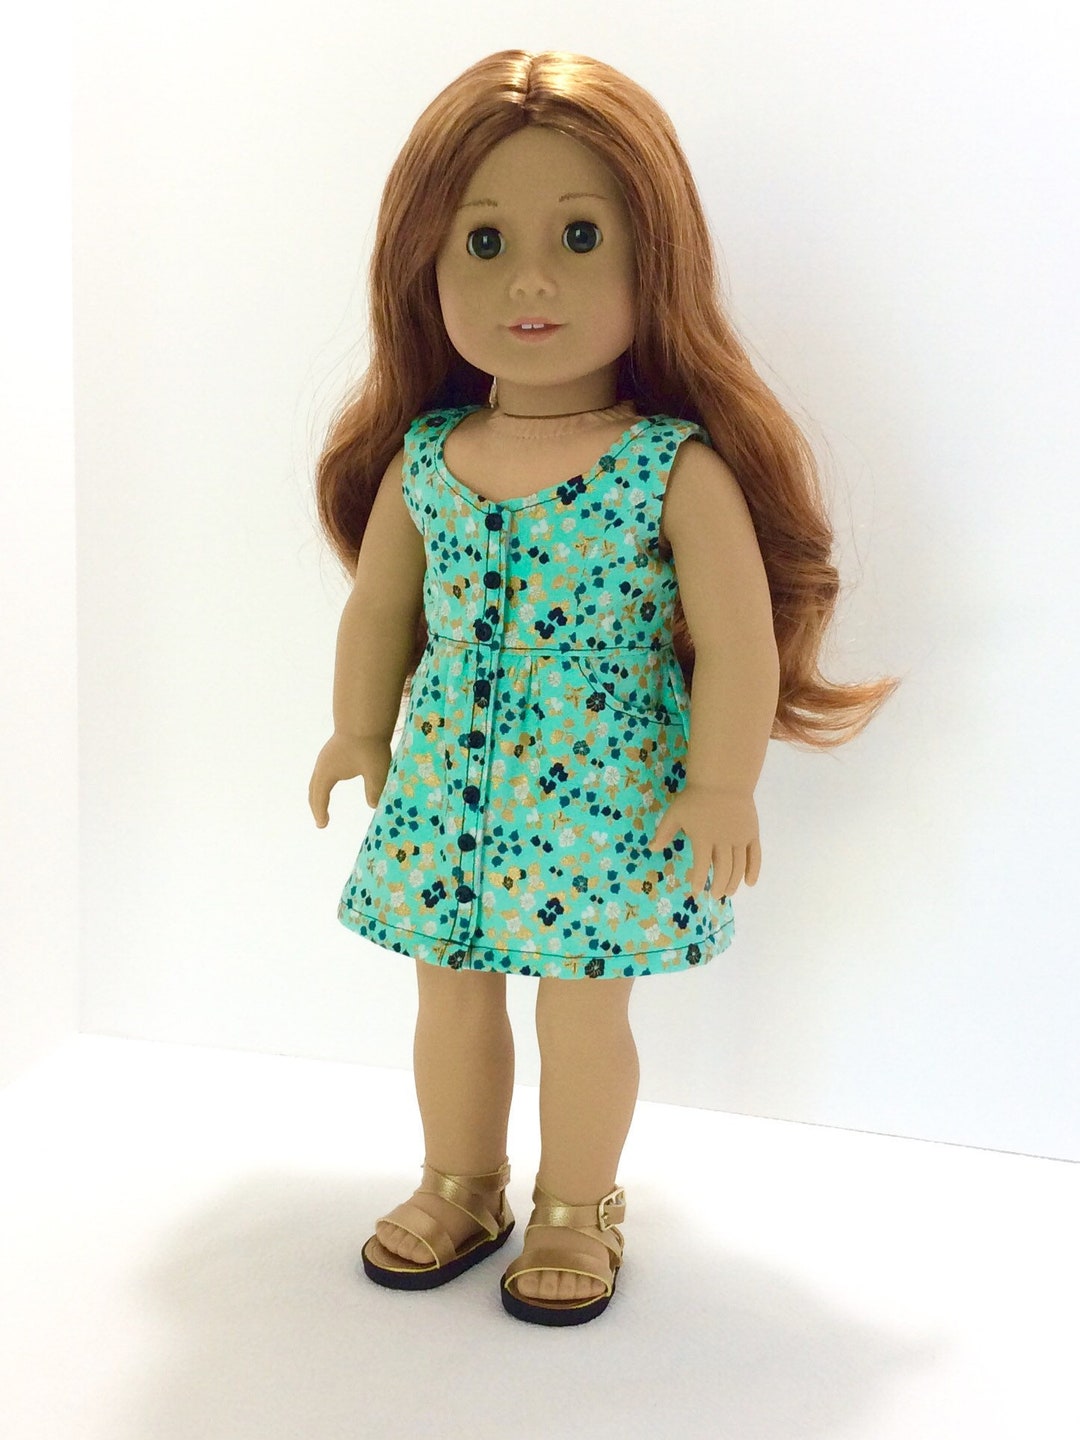 Teal Black and Gold Floral Dress AG Doll Clothing 18 Inch - Etsy